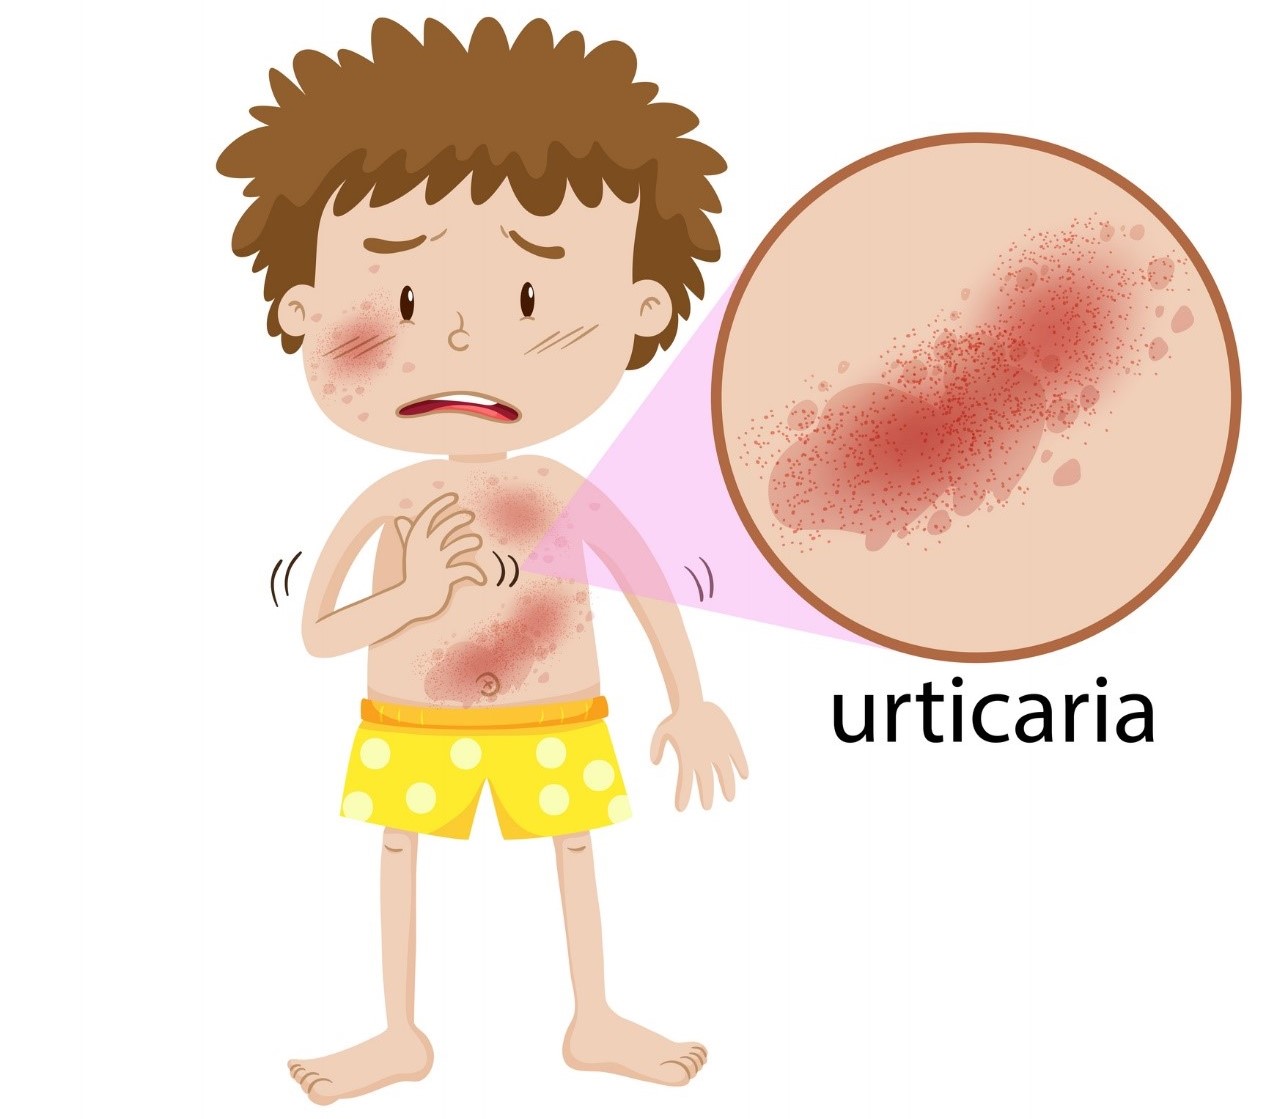 Animation - a boy with rashes all over his body, reddening of the skin, hives.